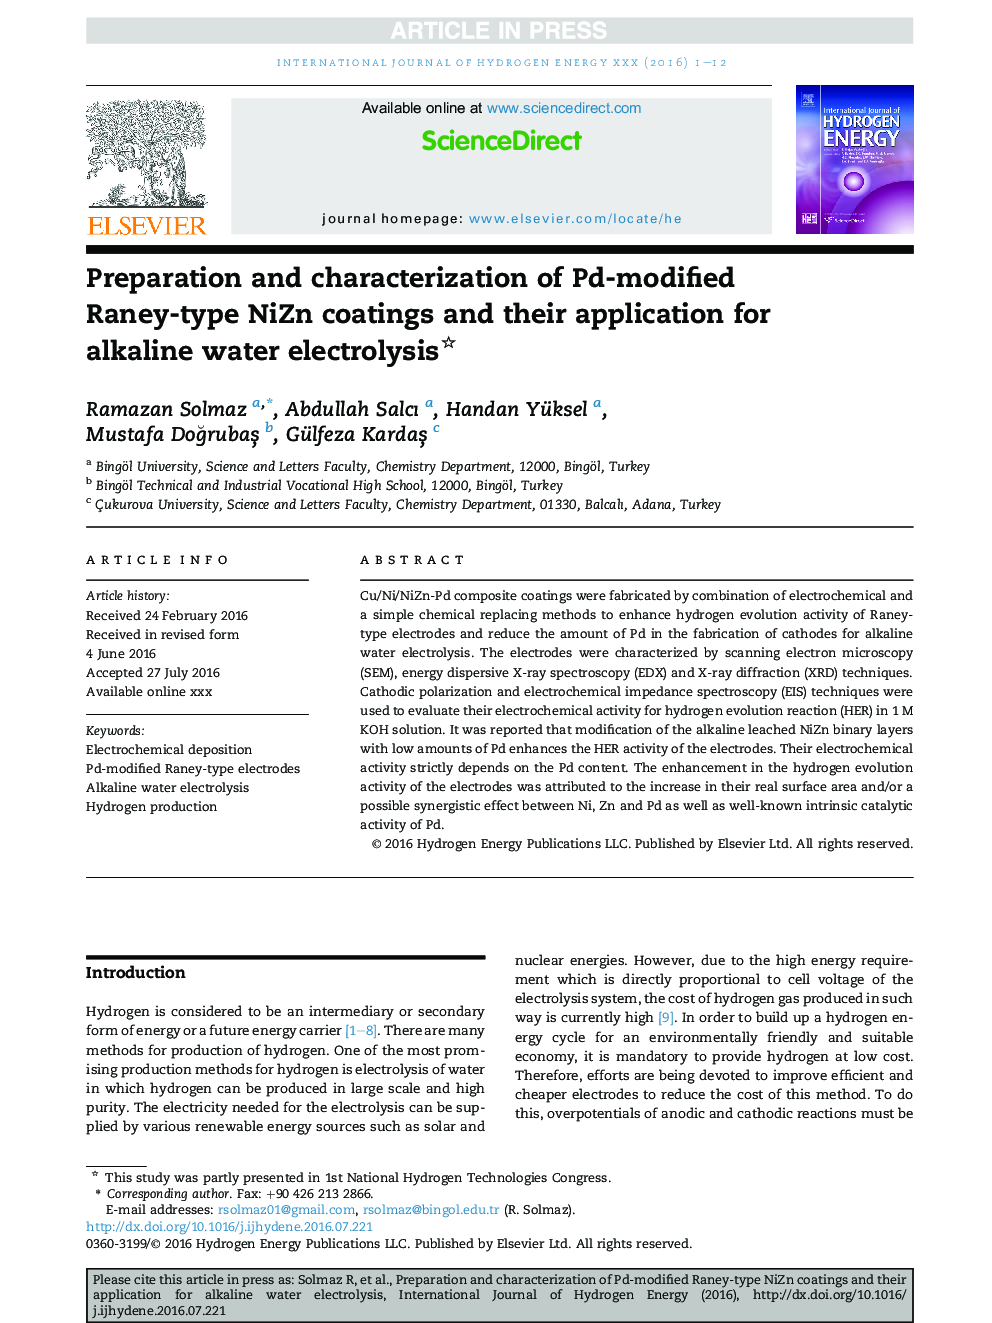 Preparation and characterization of Pd-modified Raney-type NiZn coatings and their application for alkaline water electrolysis